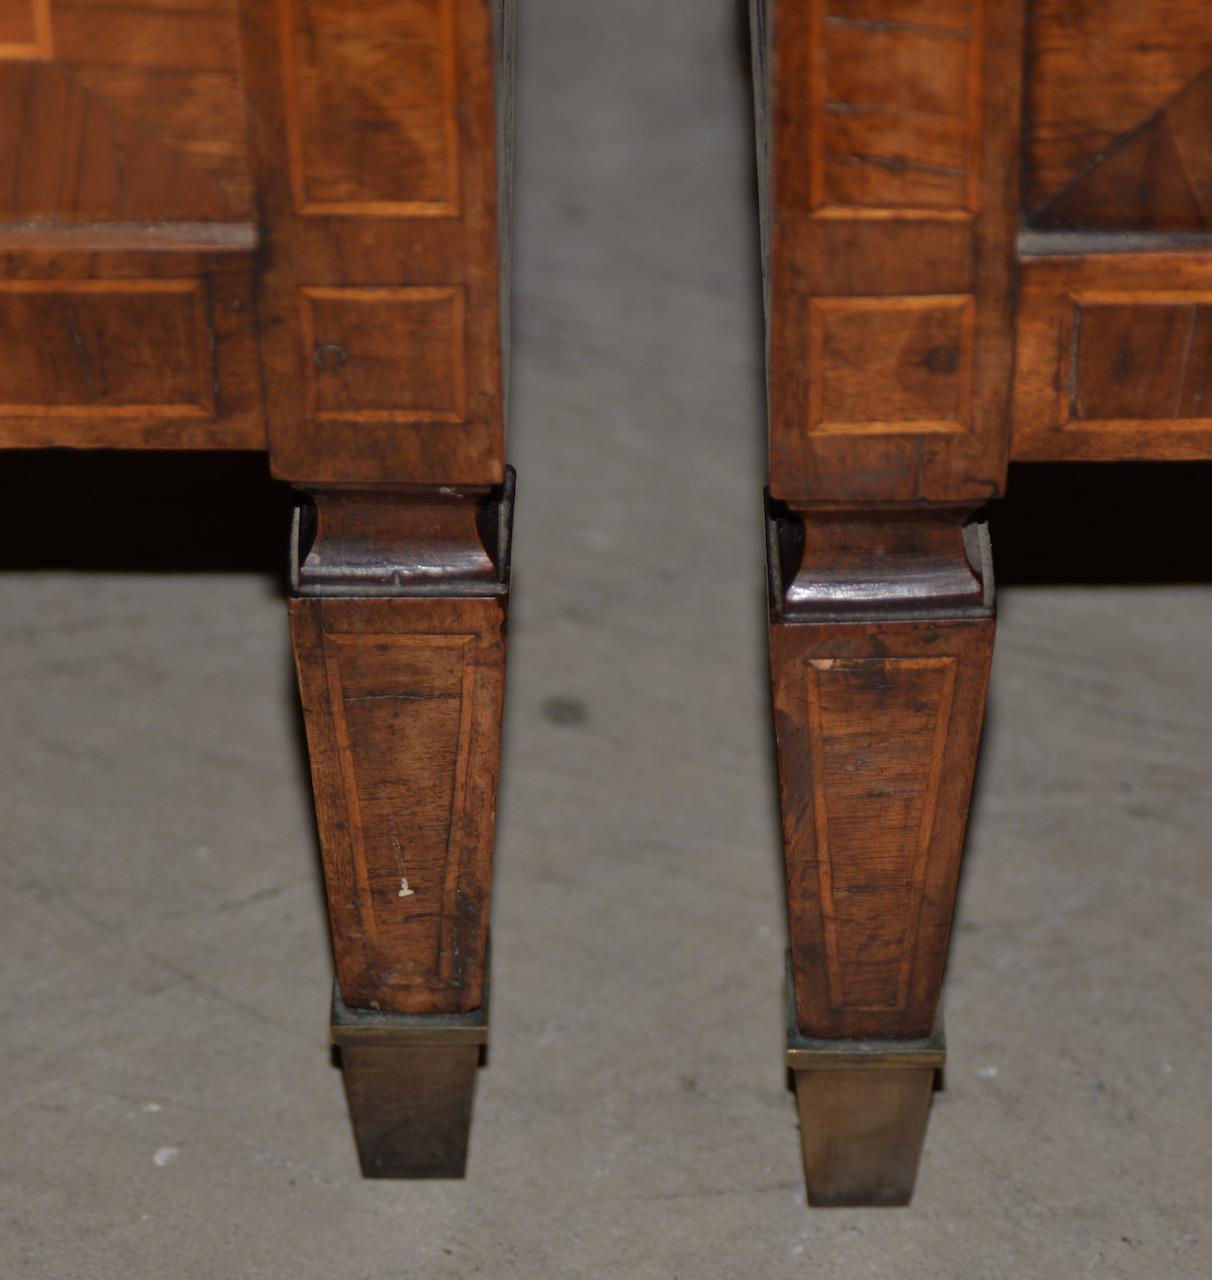 Hand-Crafted Pair of 19th Century Walnut Side Tables with Cabinets